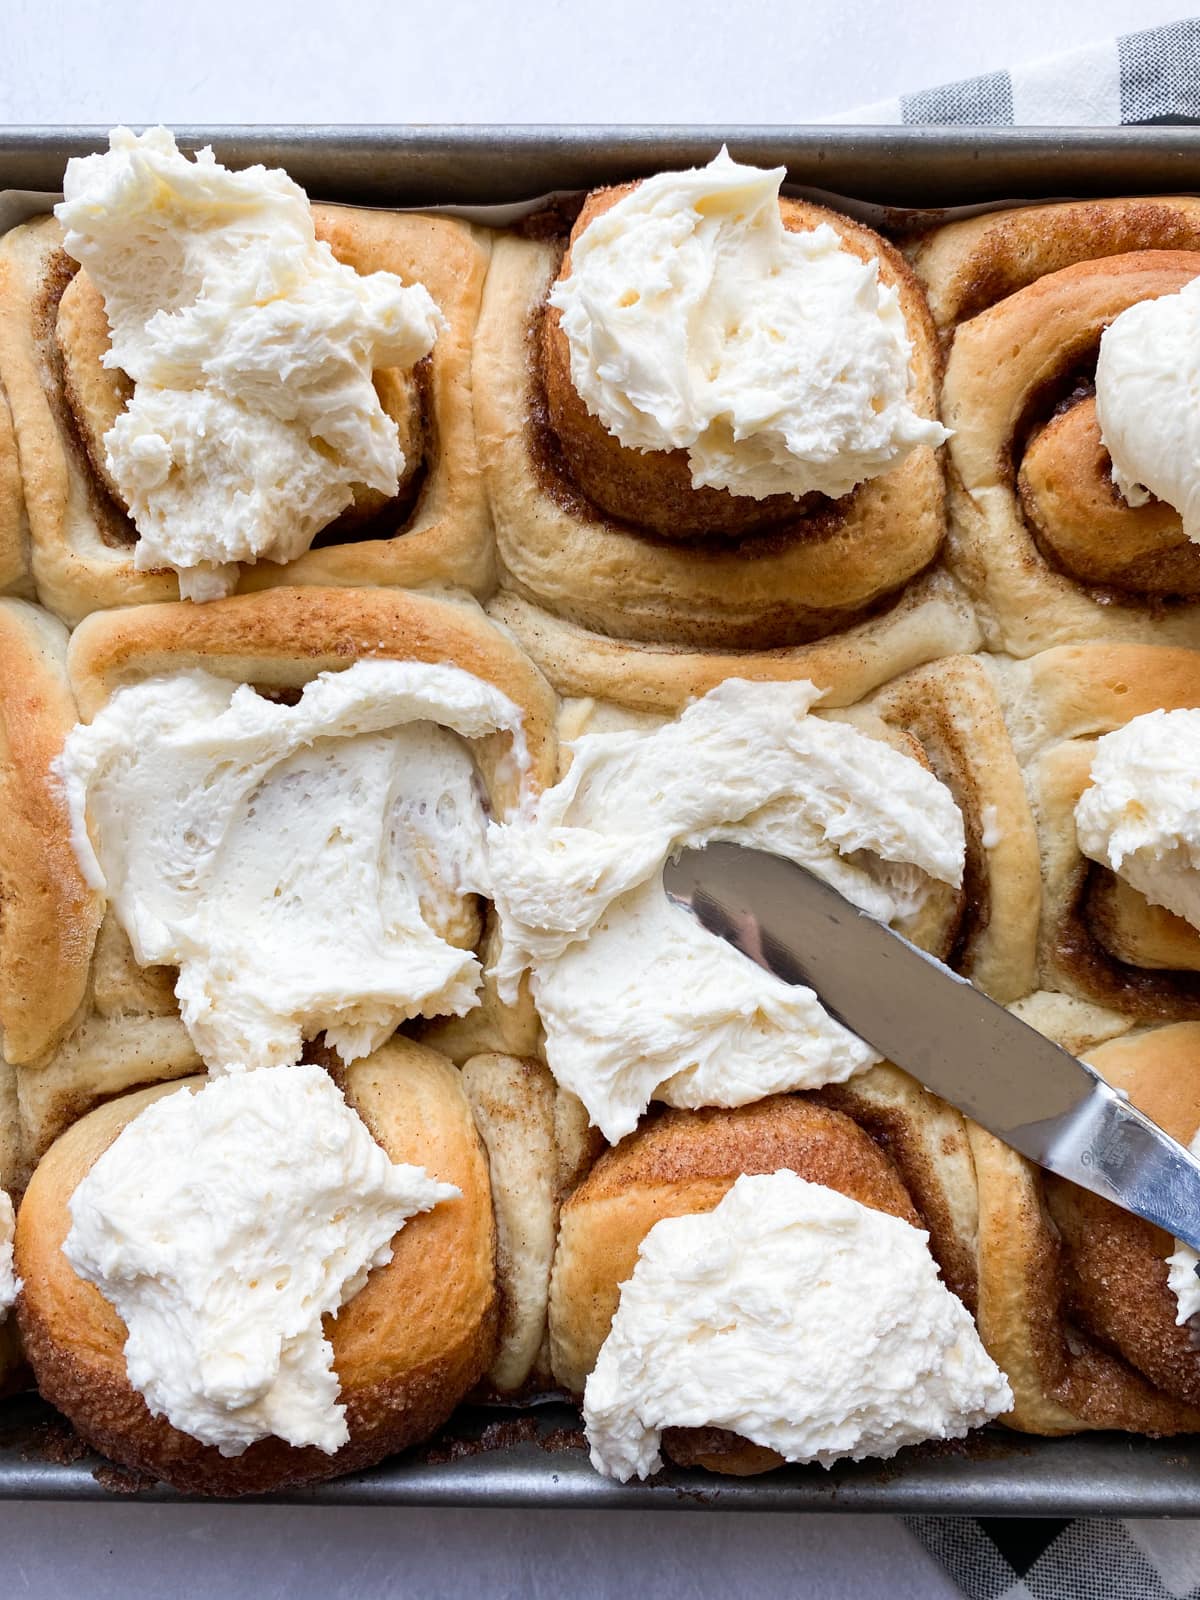 Baked Cinnamon Rolls topped with frosting